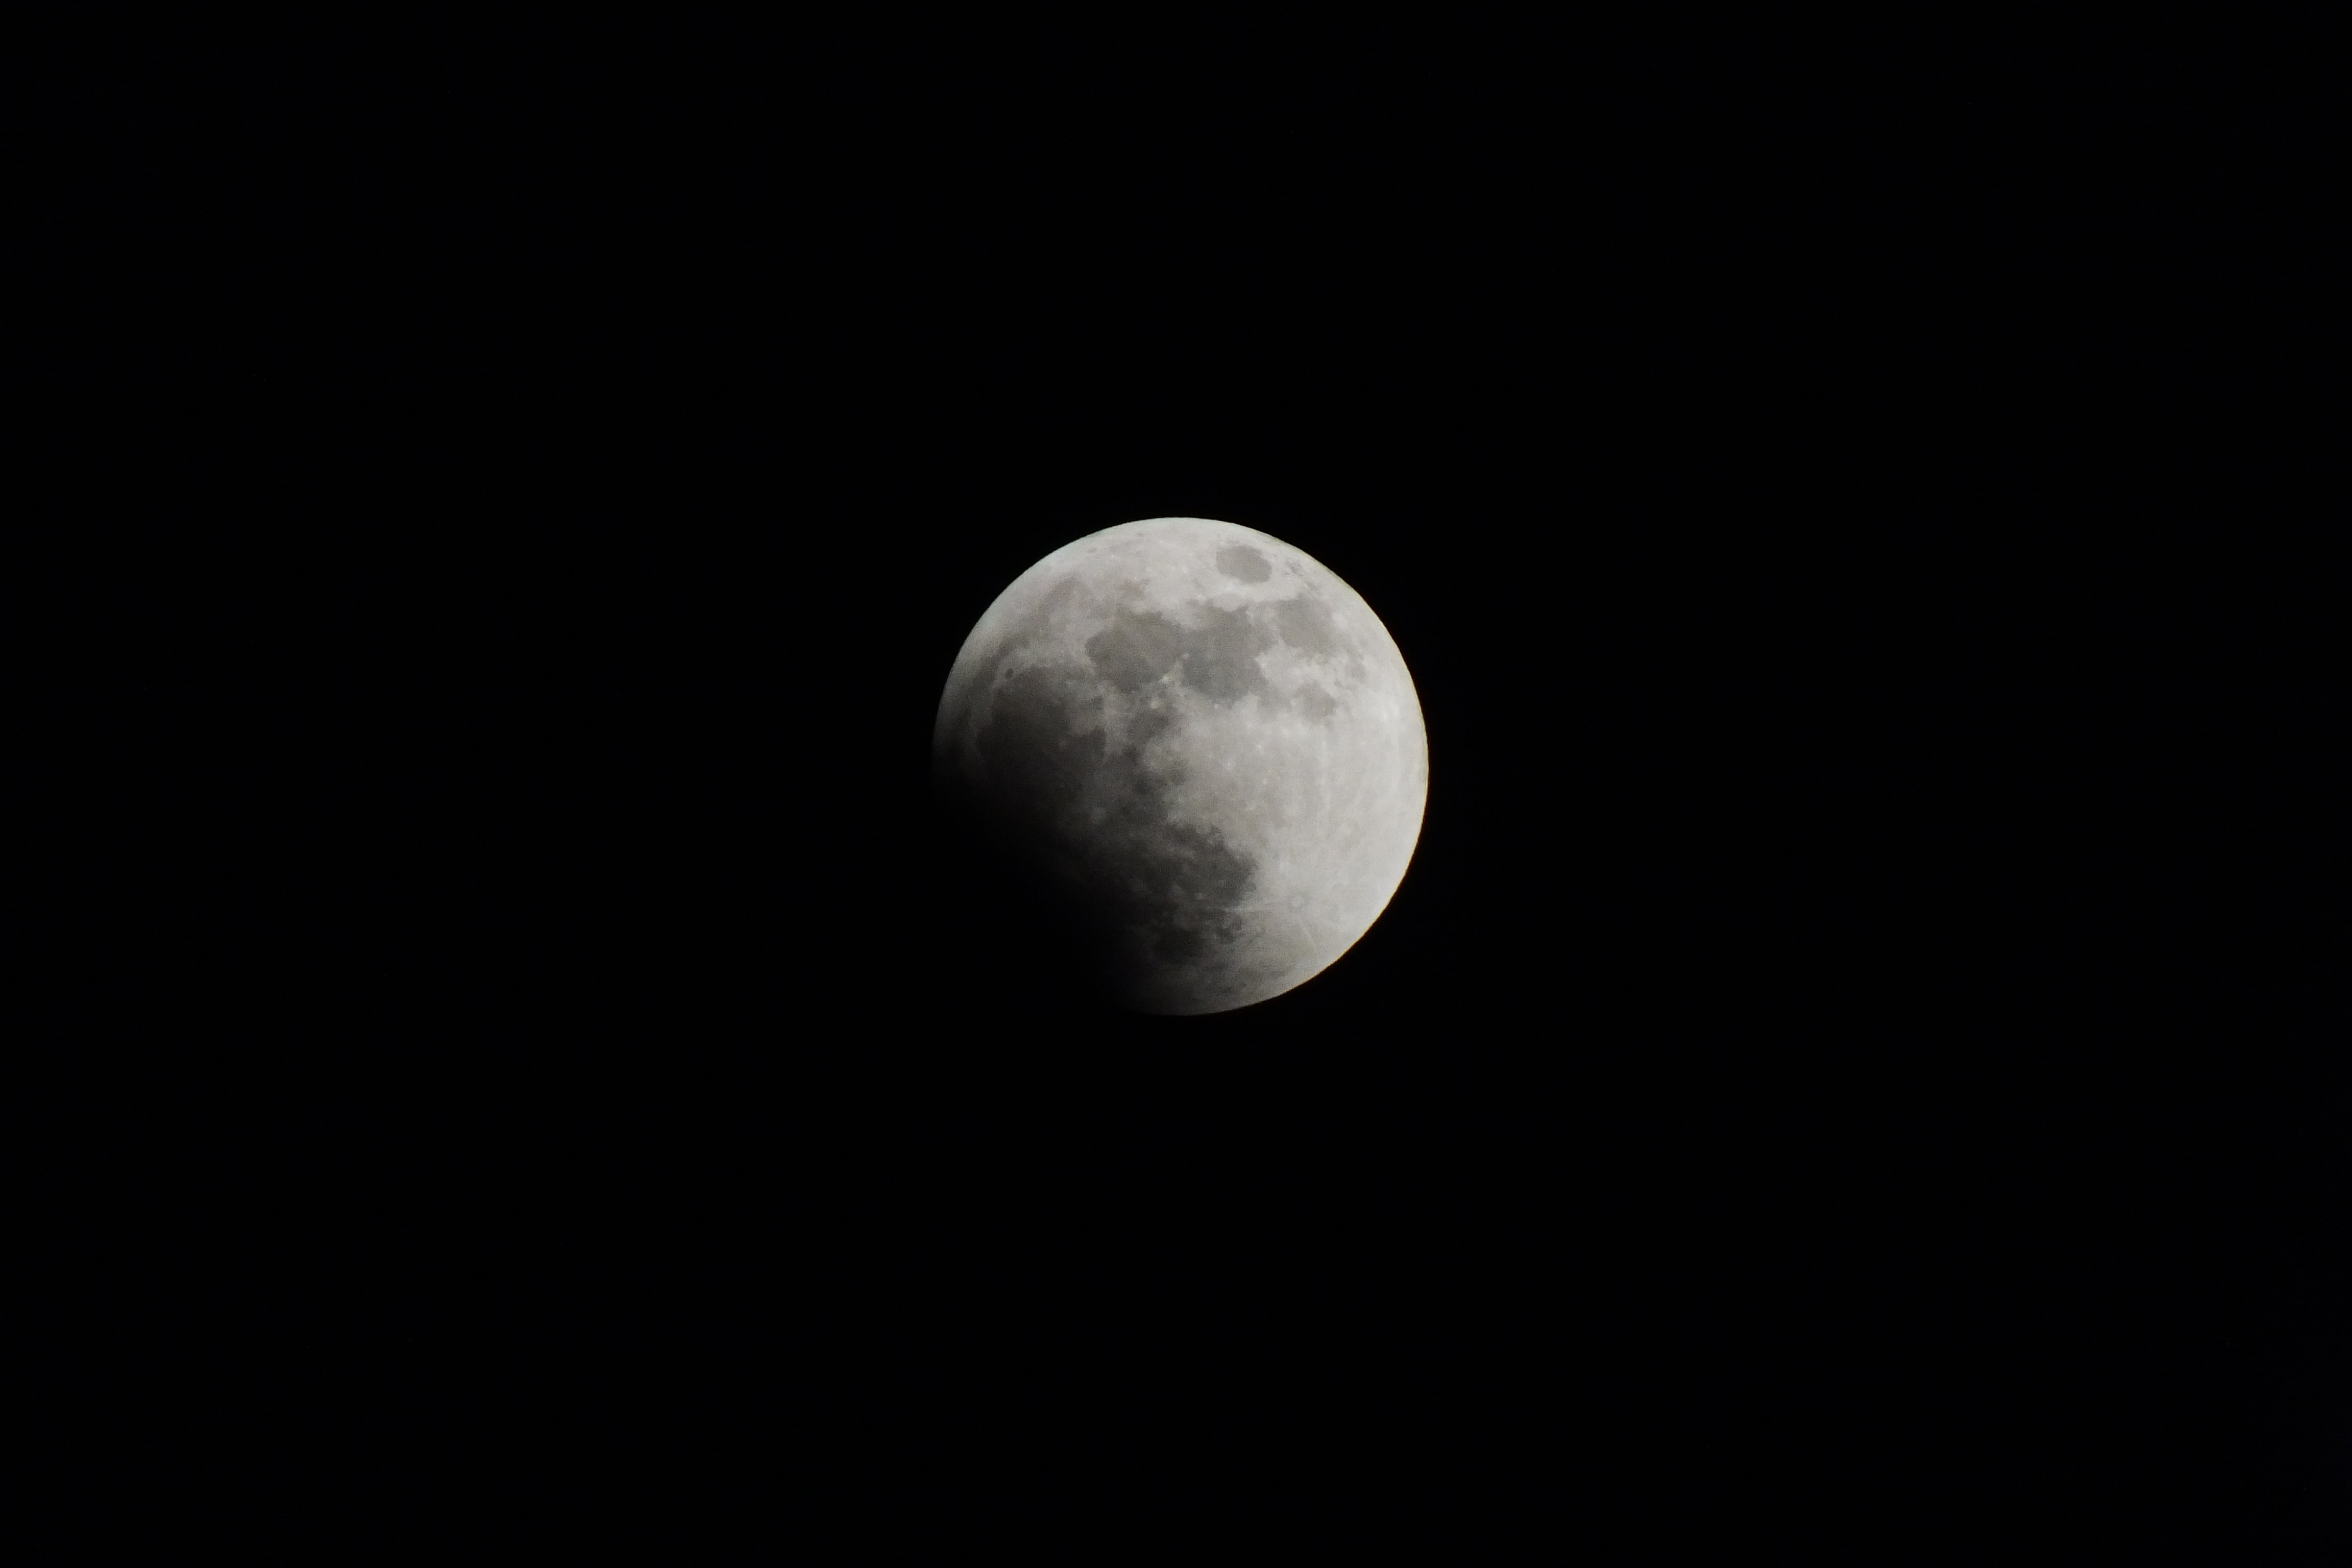 Moon Eclipse, Eclipse, Night, Craters, moon, astronomy